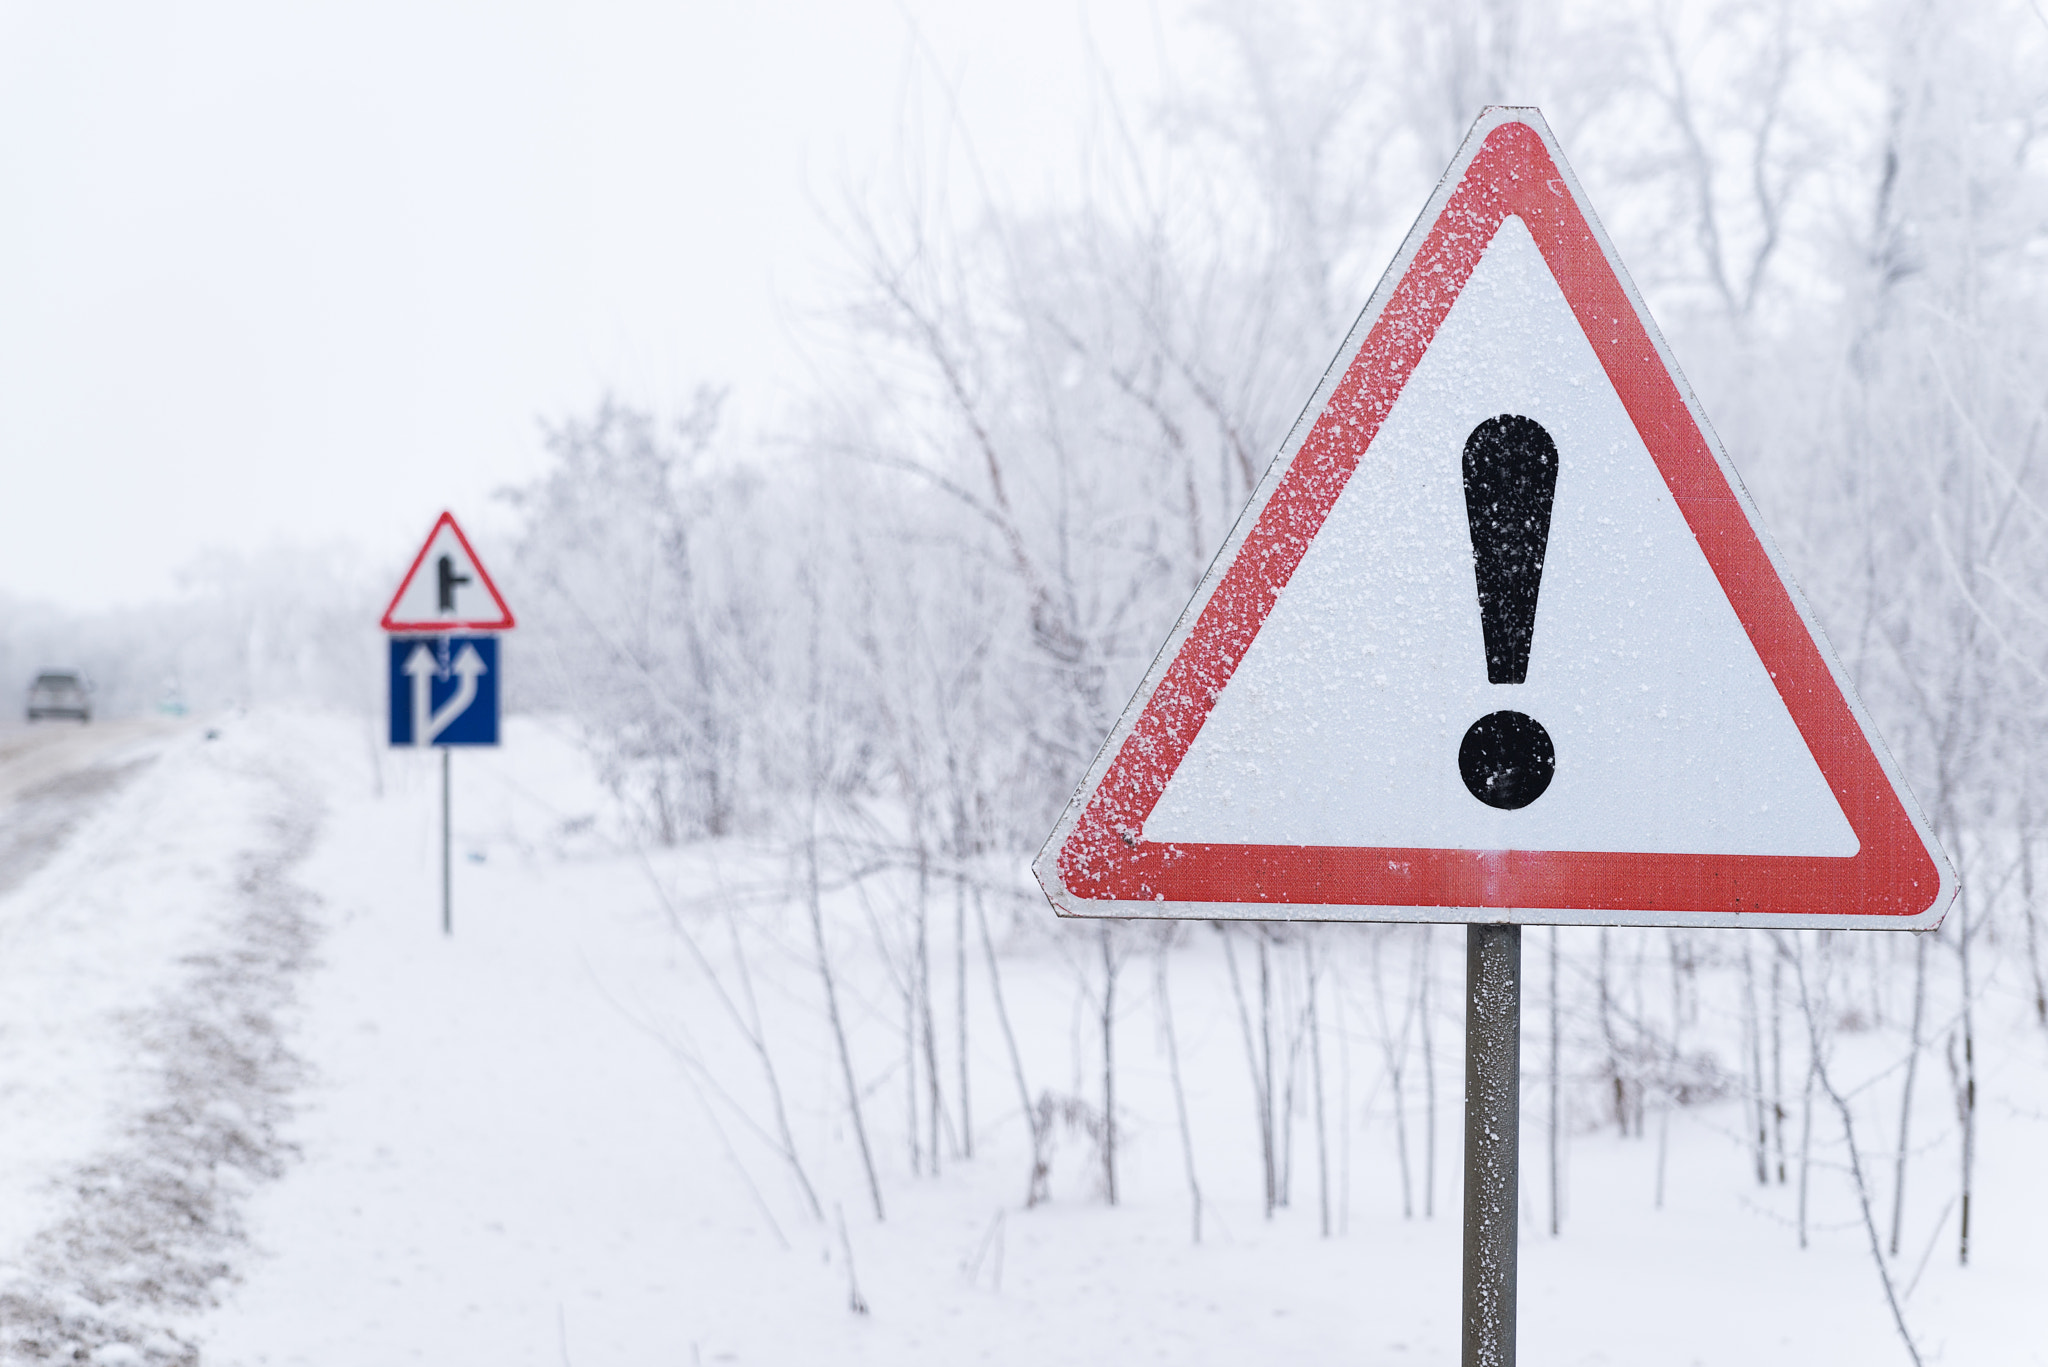 Nikon D800 + Tamron AF 28-75mm F2.8 XR Di LD Aspherical (IF) sample photo. A road sign stands on the snowy roadside photography